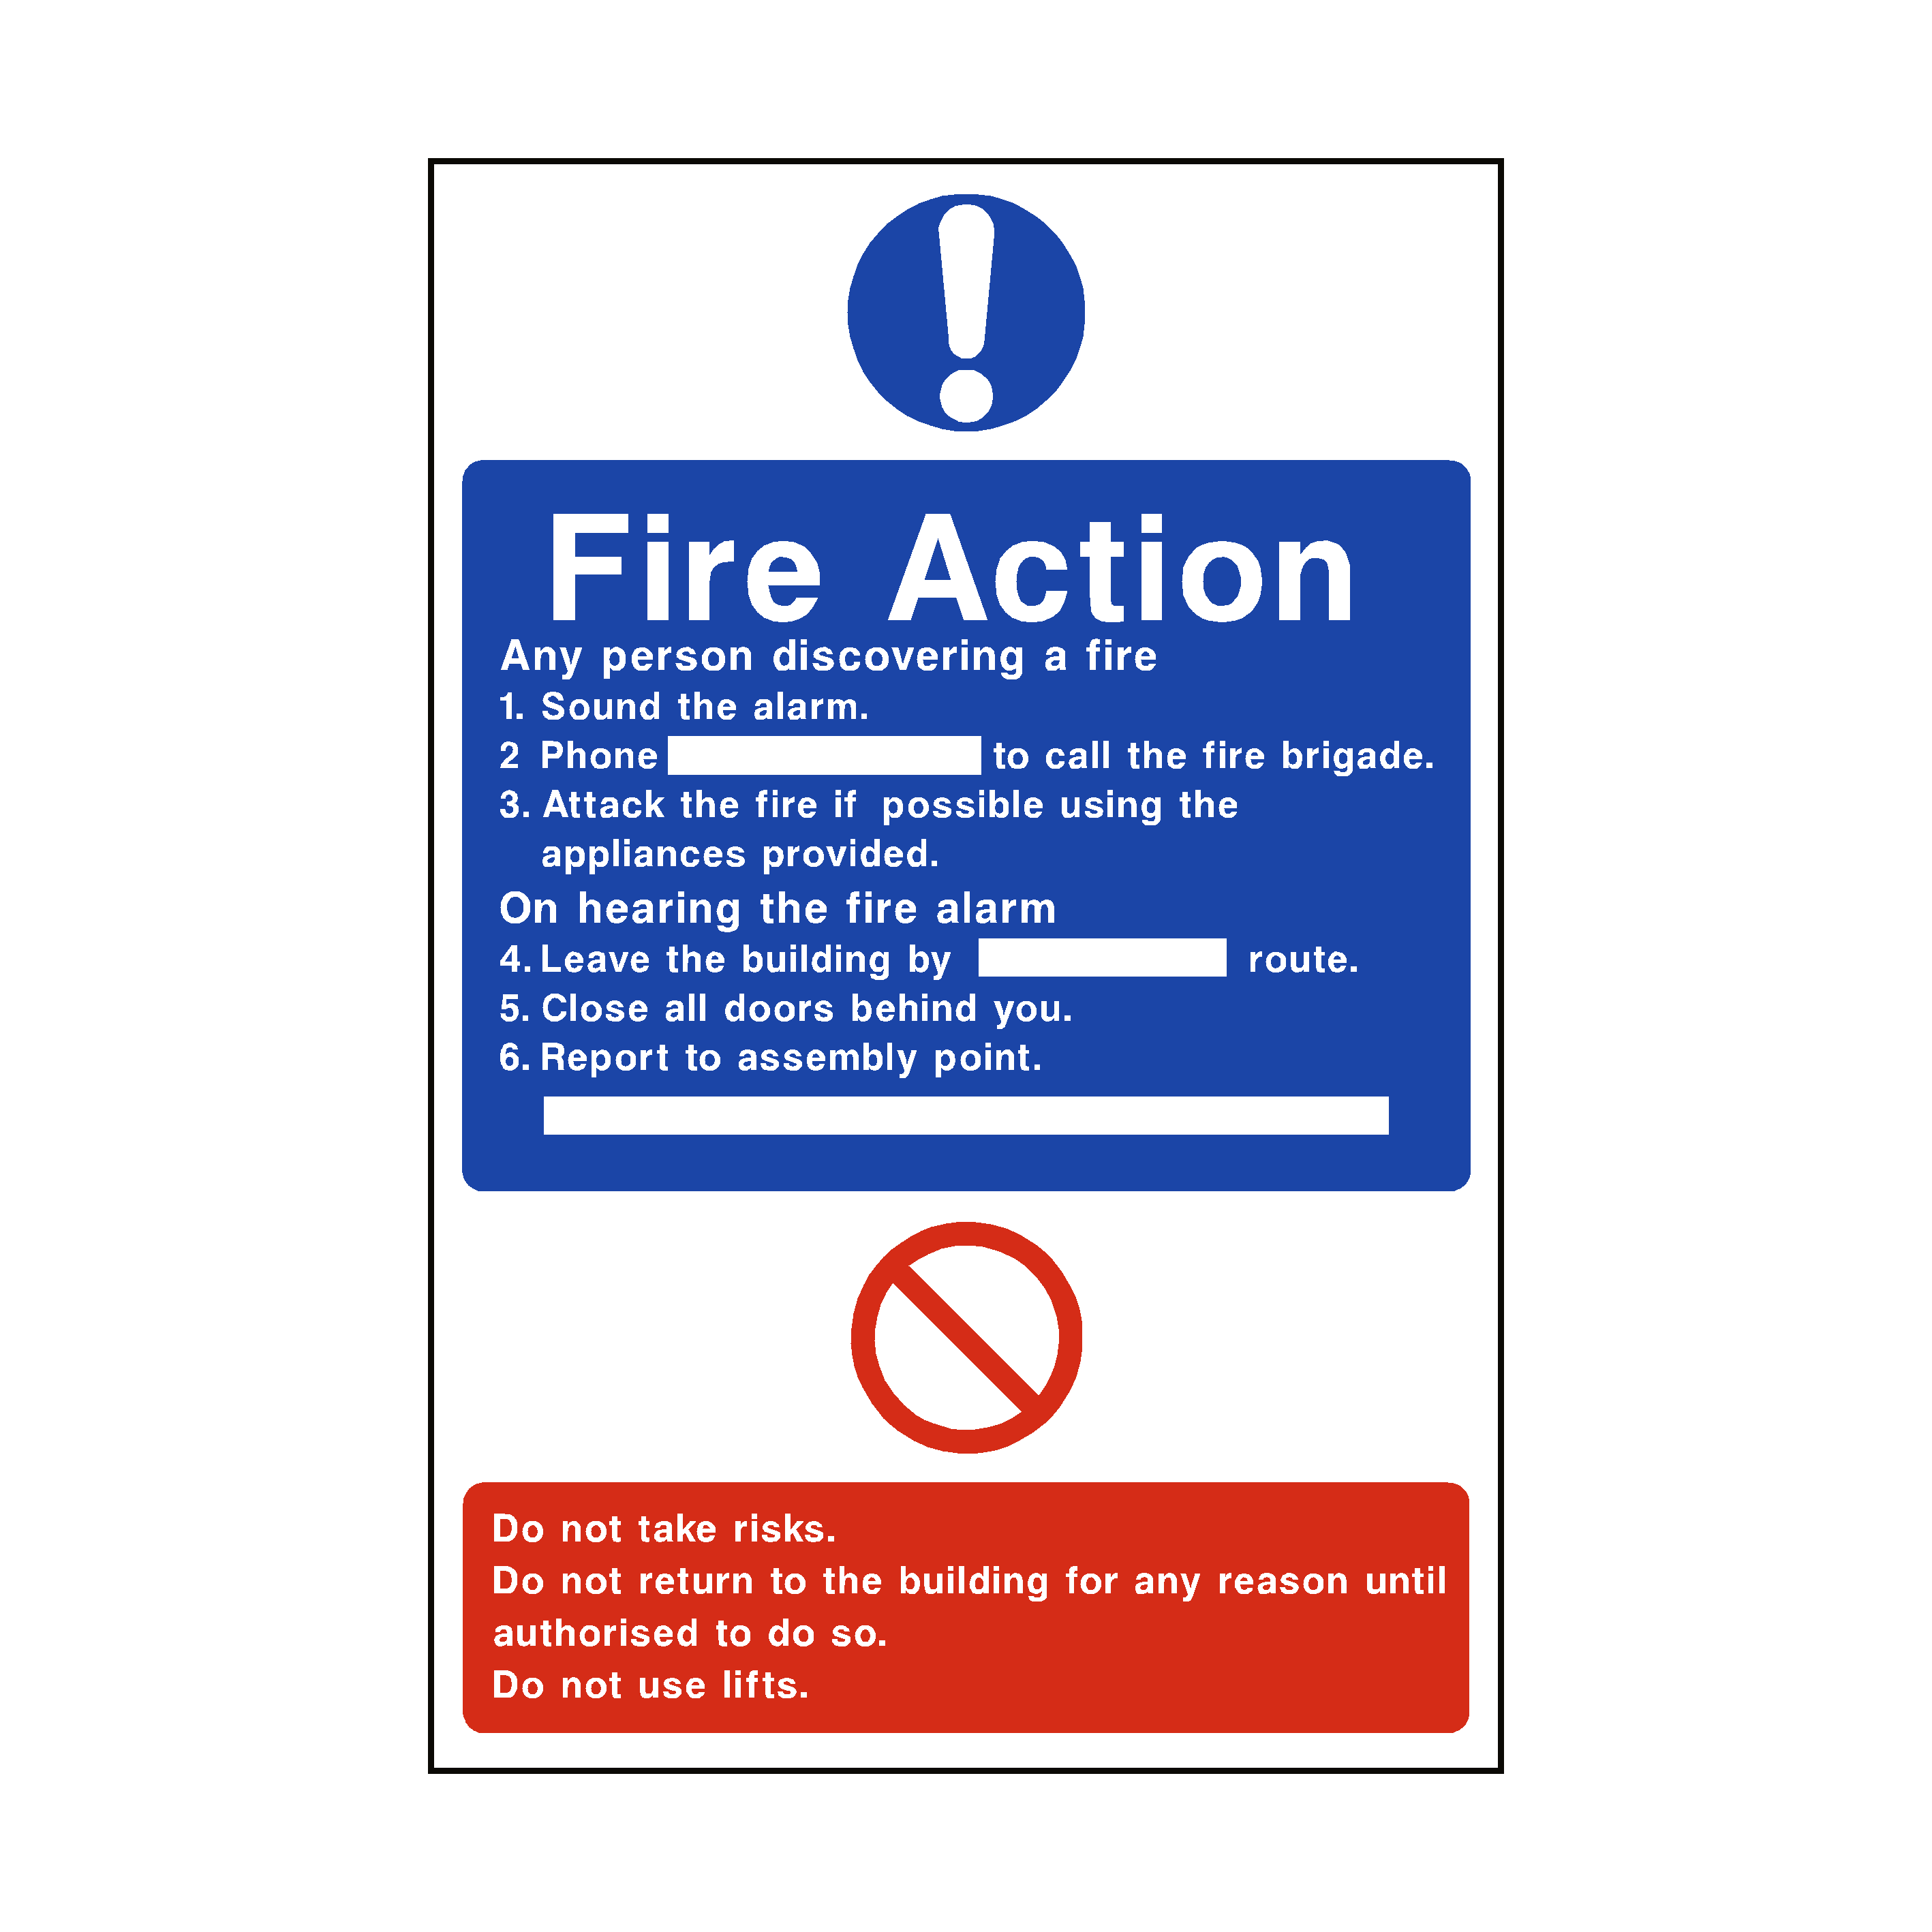 free-photo-fire-action-action-alarm-button-free-download-jooinn